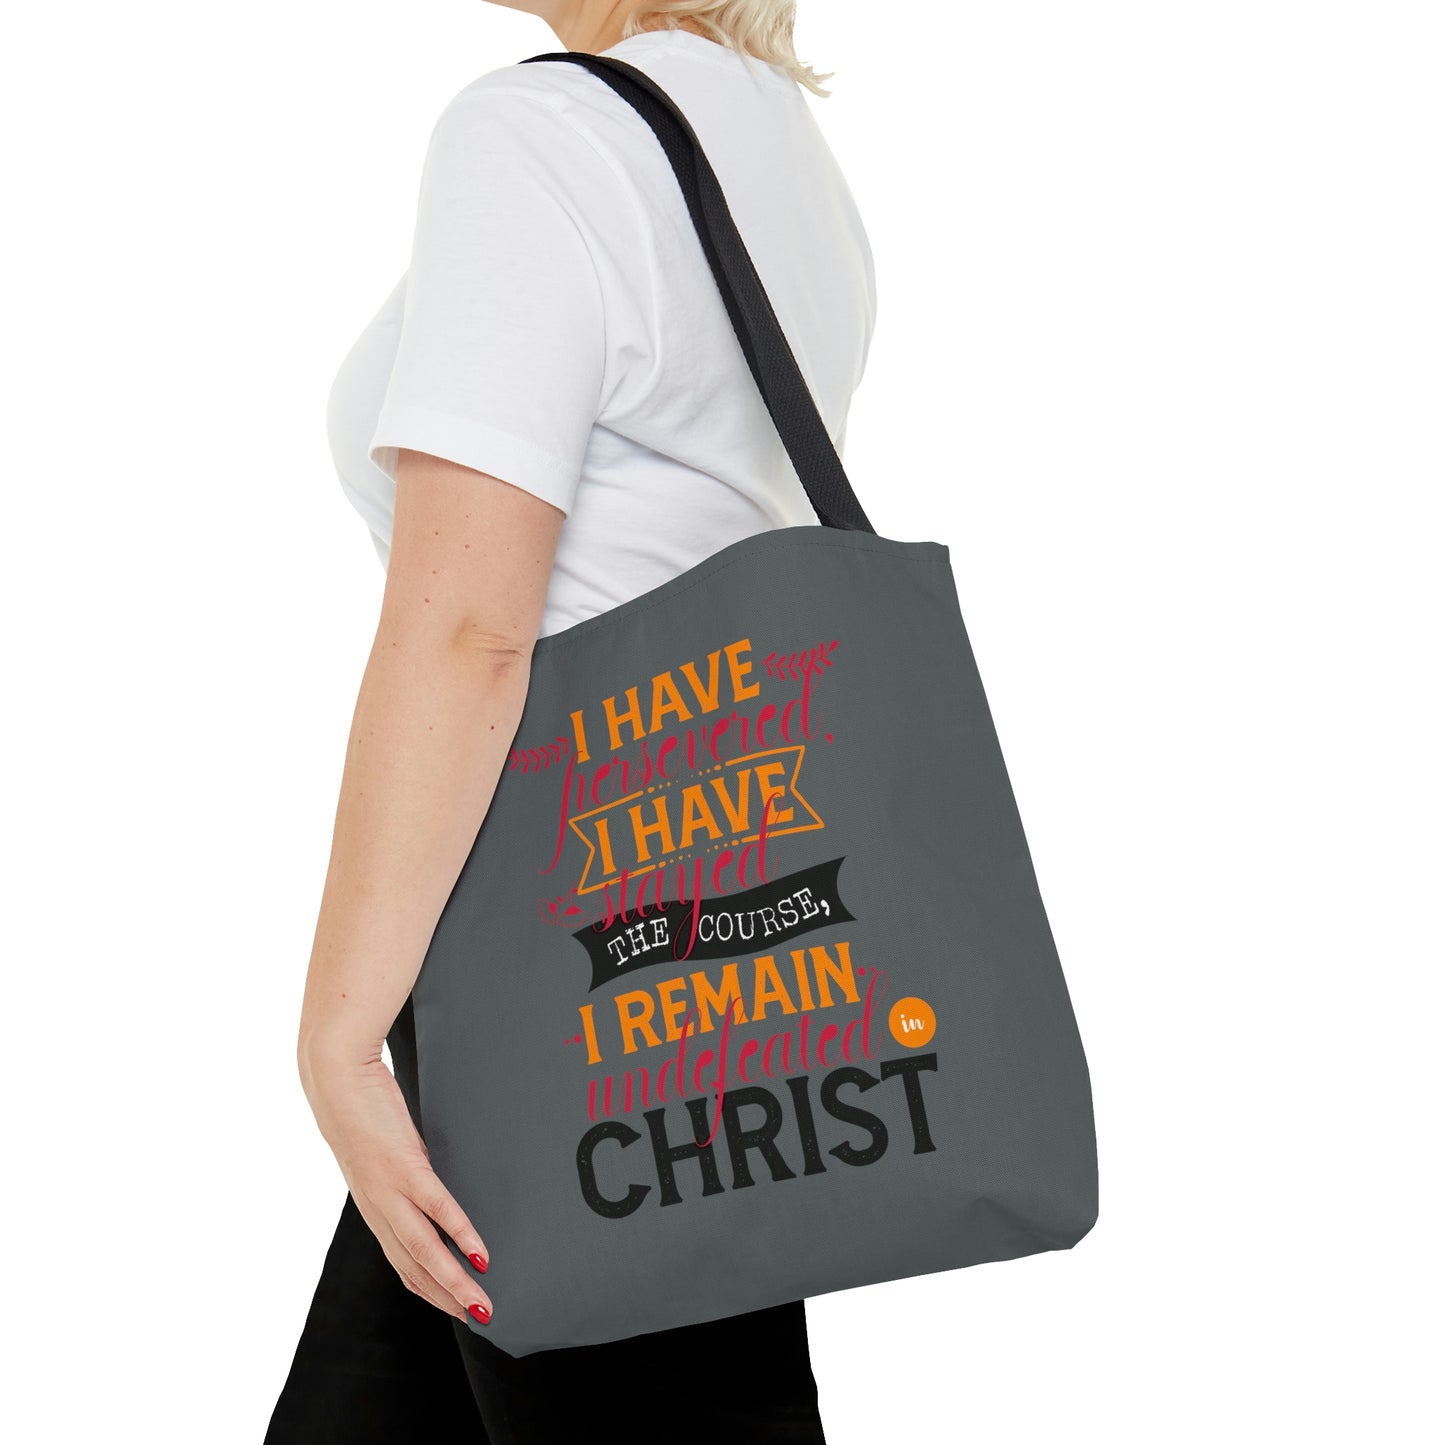 I Have Persevered I Have Stayed The Course I Remain Undefeated In Christ Tote Bag